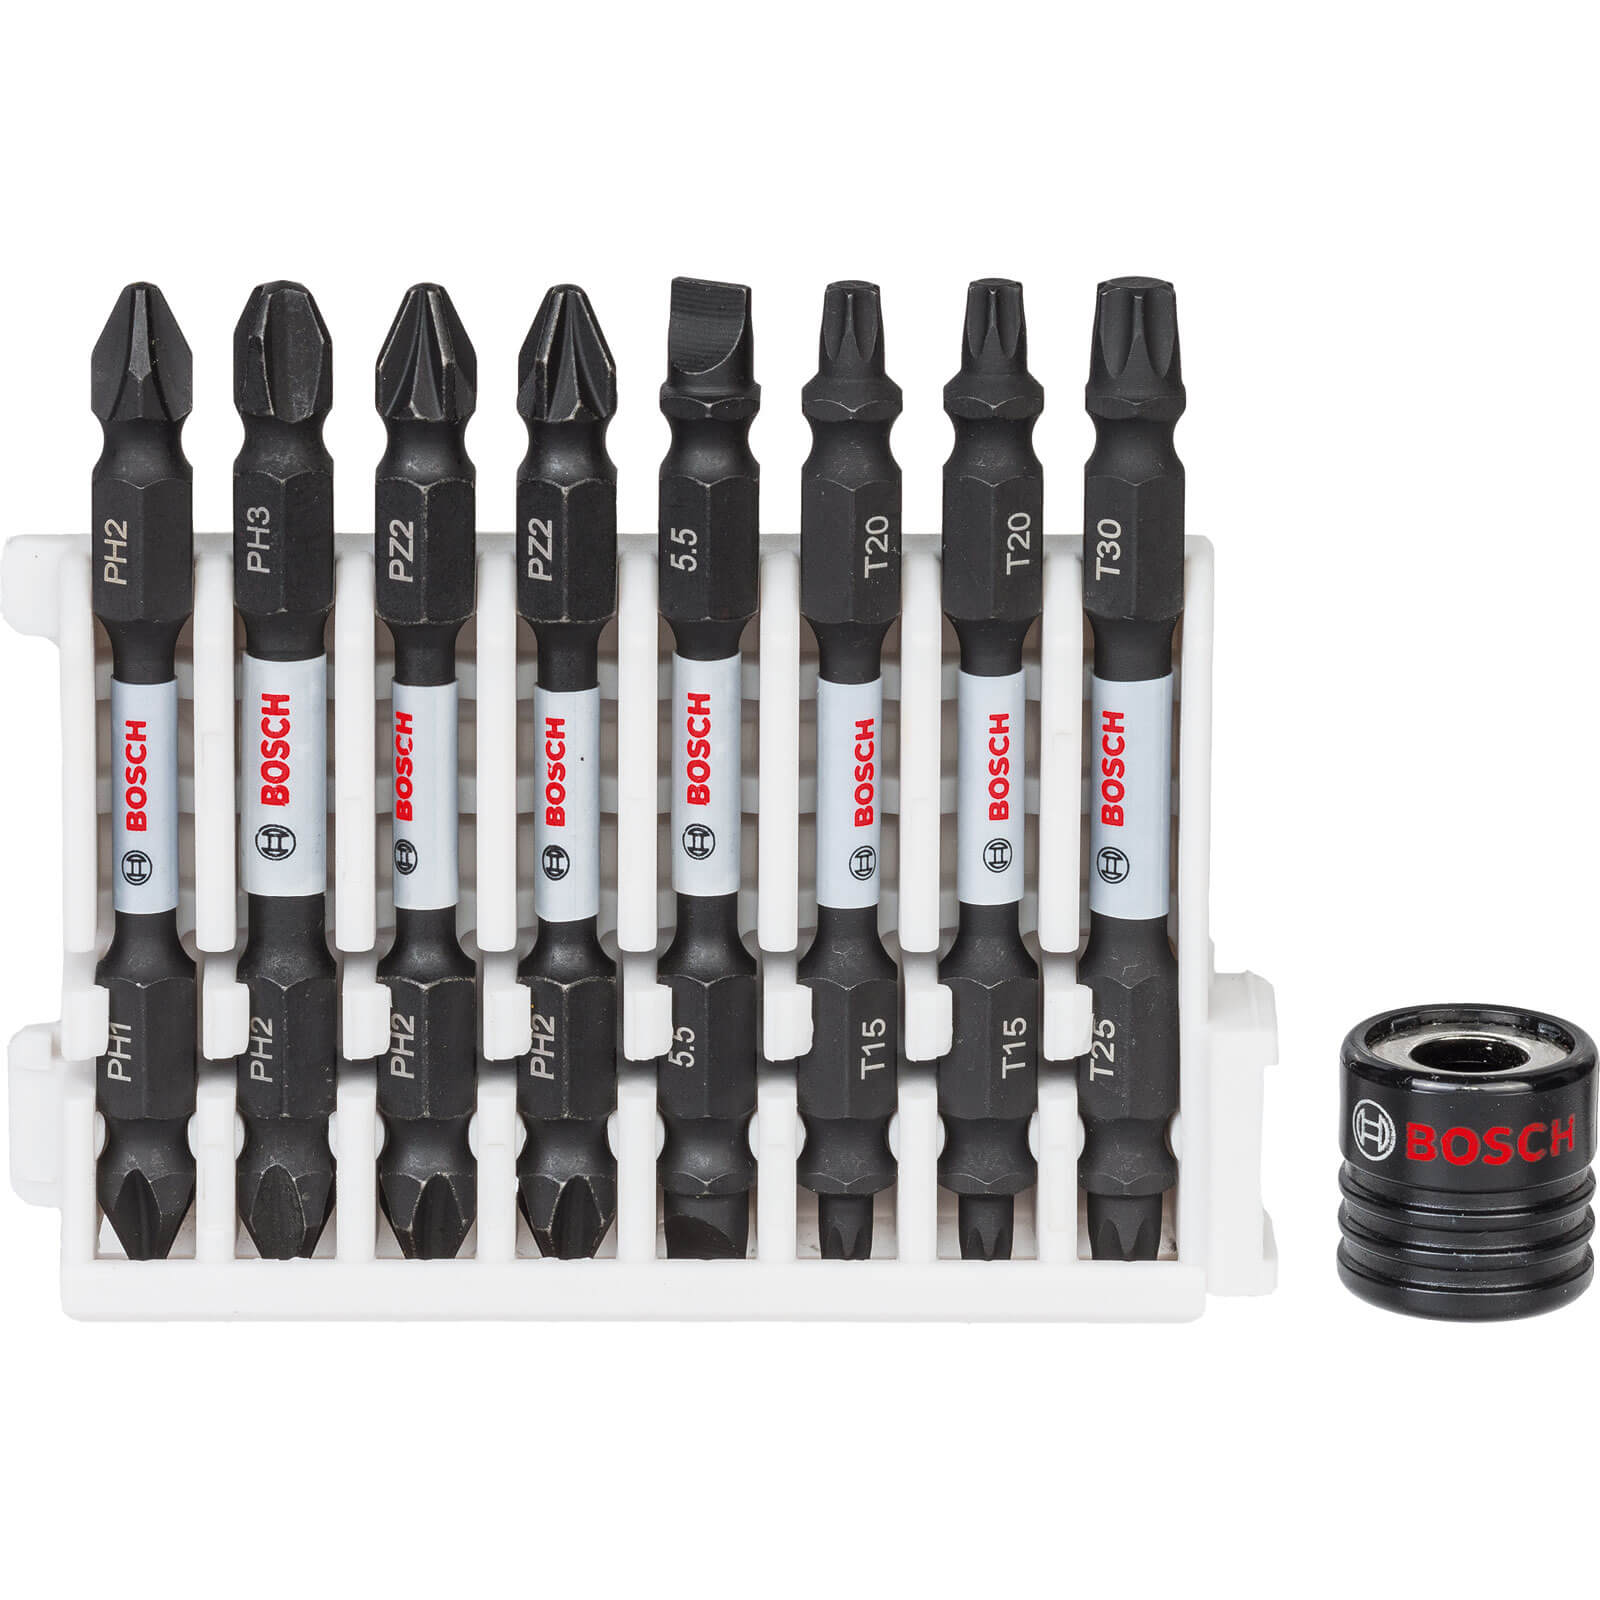 Photo of Bosch 9 Piece Impact Screwdriver Bit Set And Magnetic Sleeve